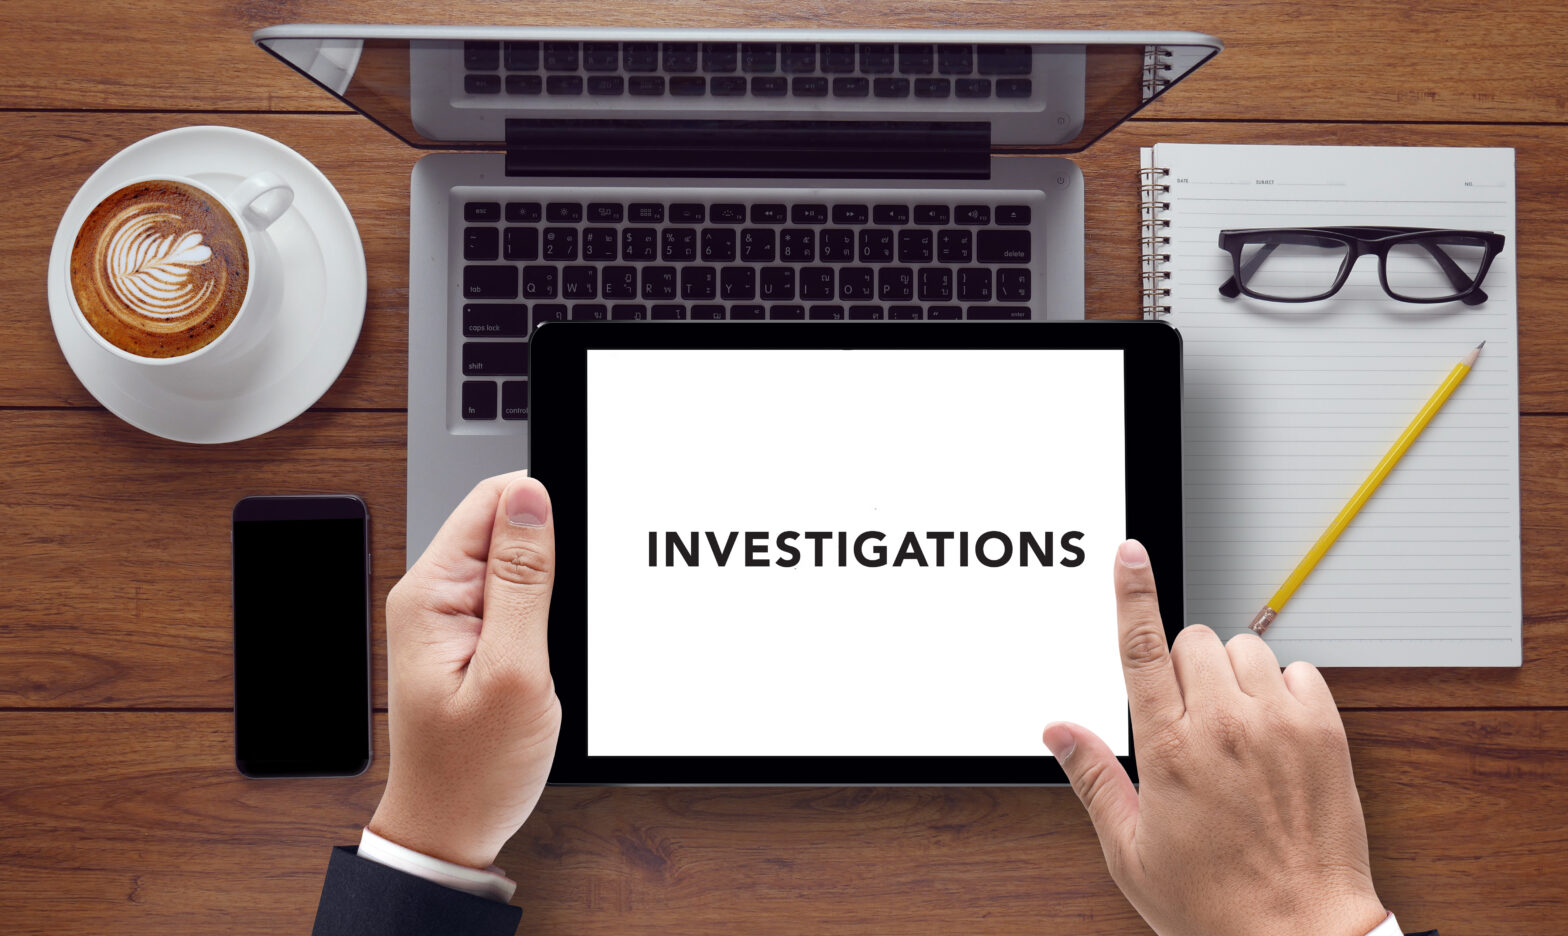 HMRC tax investigations: Eight reasons HMRC might audit your business